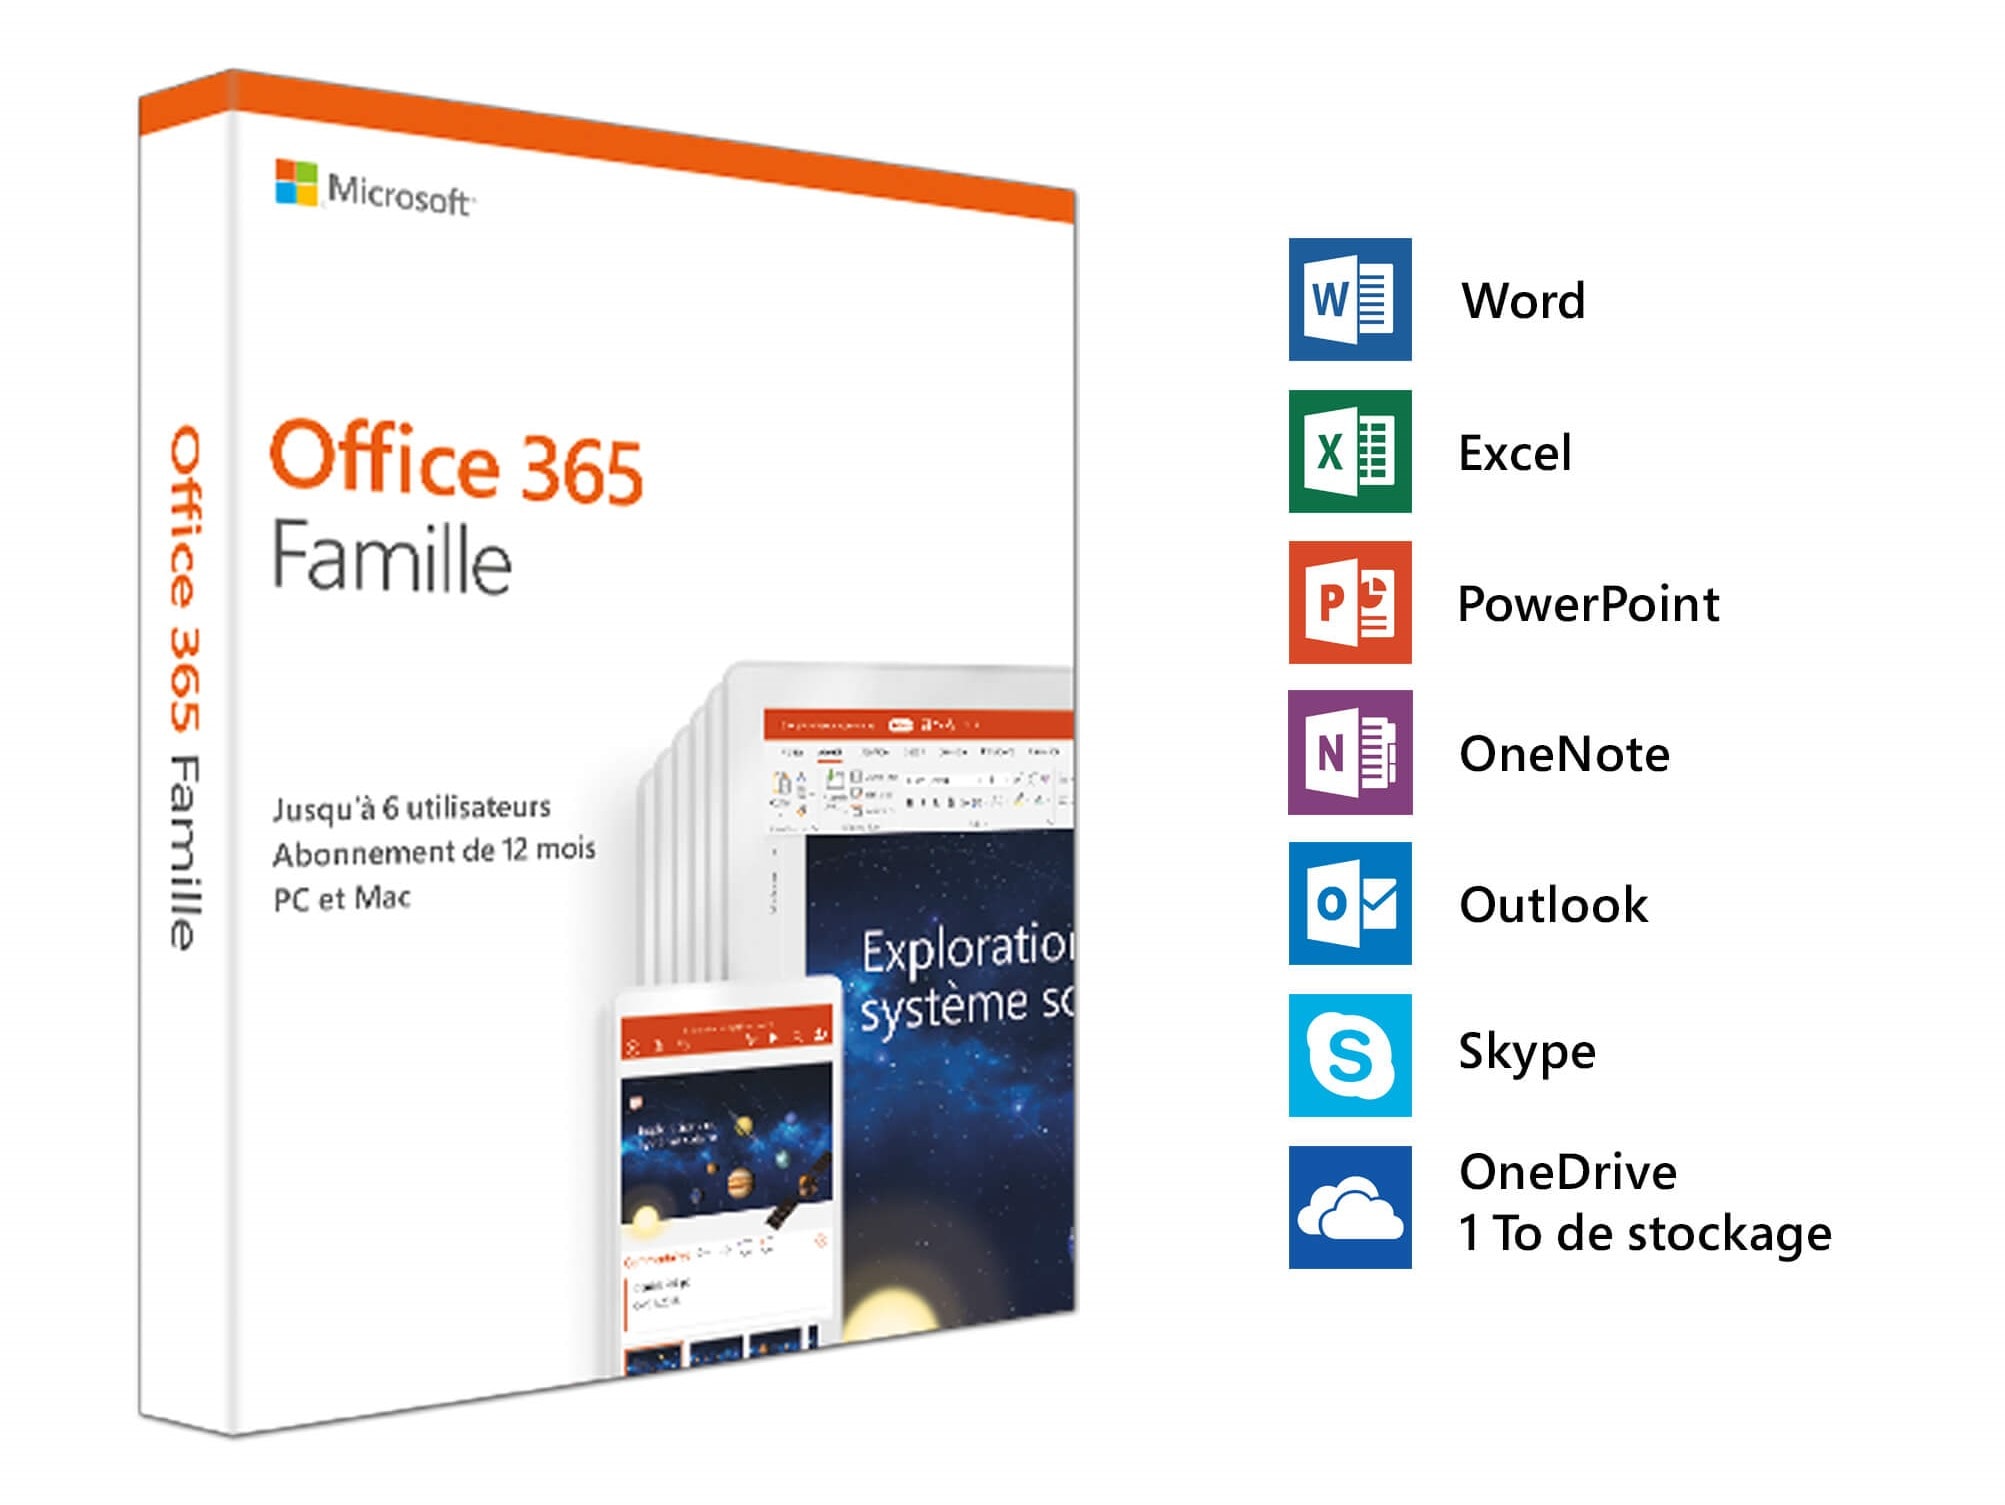 Microsoft Office 2019 is available: What's new? - Logitheque English